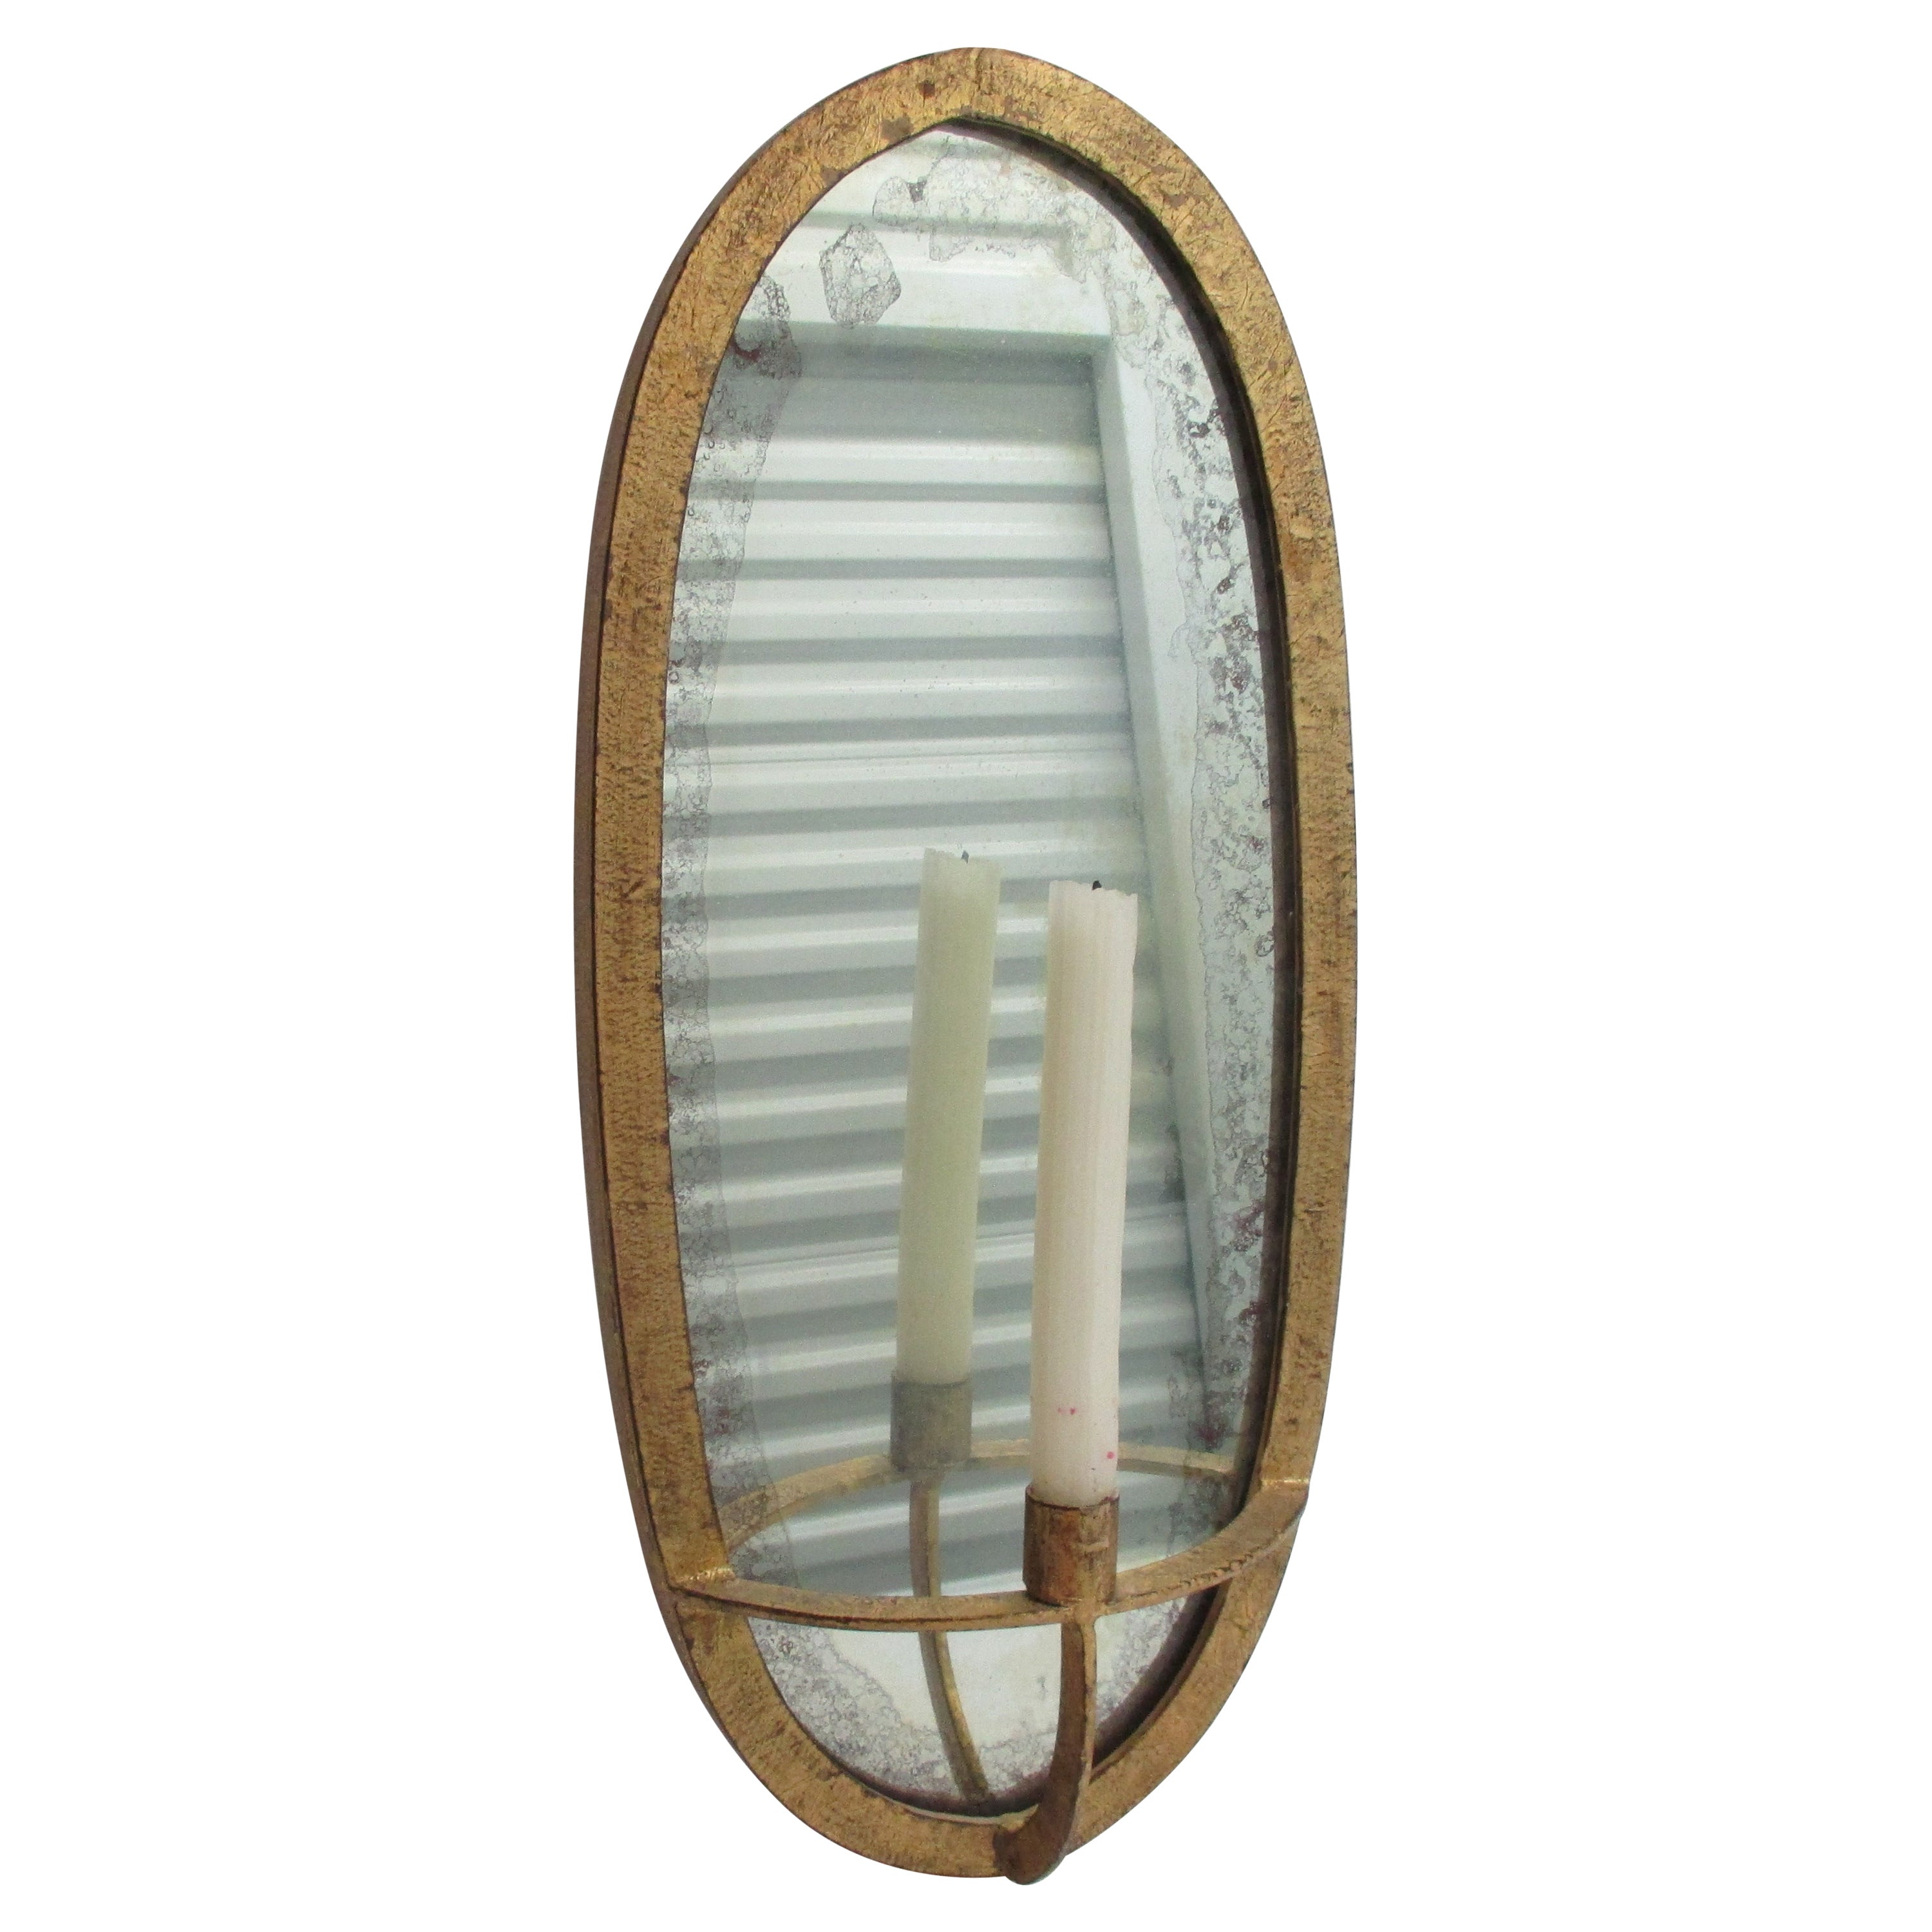 Anthropologie Oval Candle Sconce with Mirrored Back and Antique Gold Finish